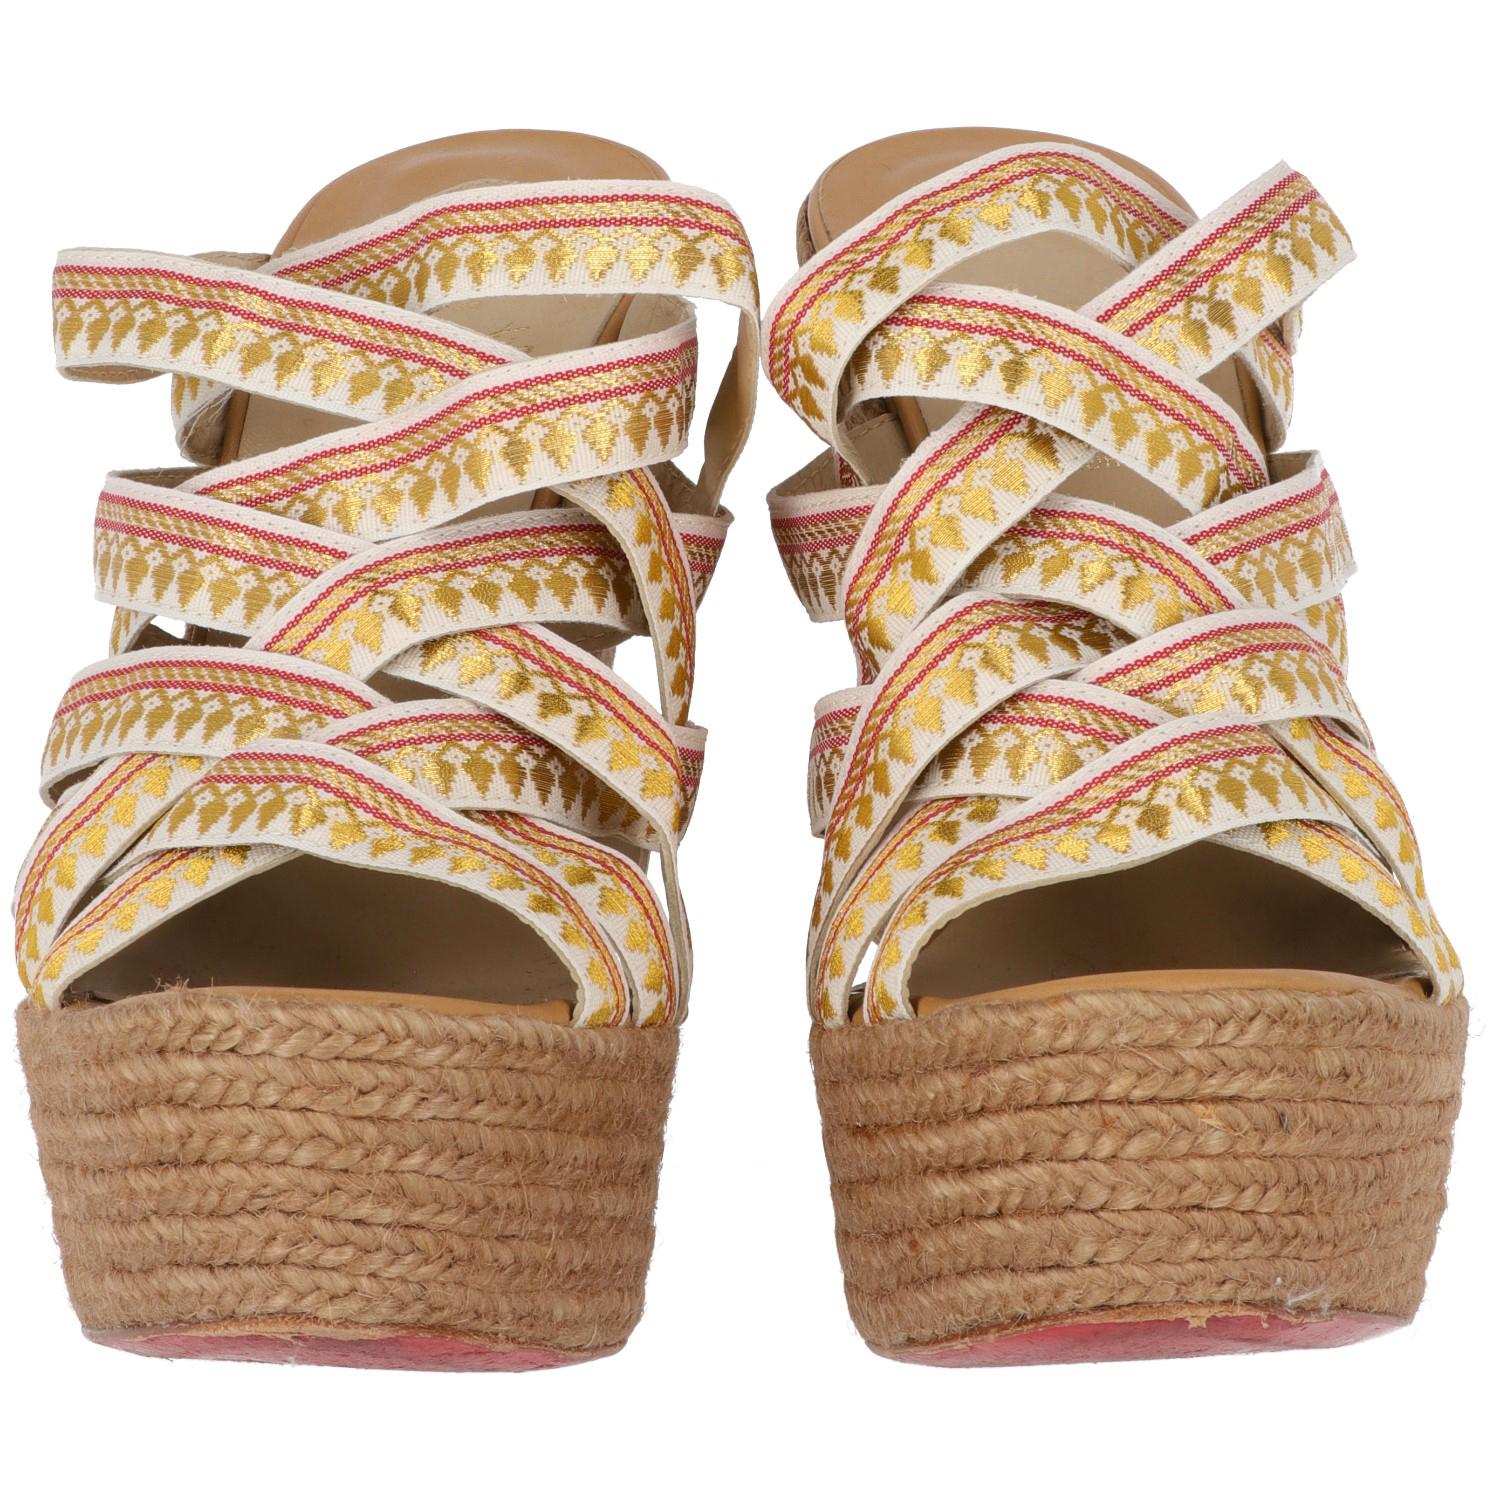 The lovely Christian Louboutin leather espadrilles feature a 14 cm high raffia platform and 4 cm high comfort plateau. Gold-tone and bordeaux decorated crossed strings embellished the sandals.
Made in Spain
Years: 2010s

Size: 39

Heels: 14